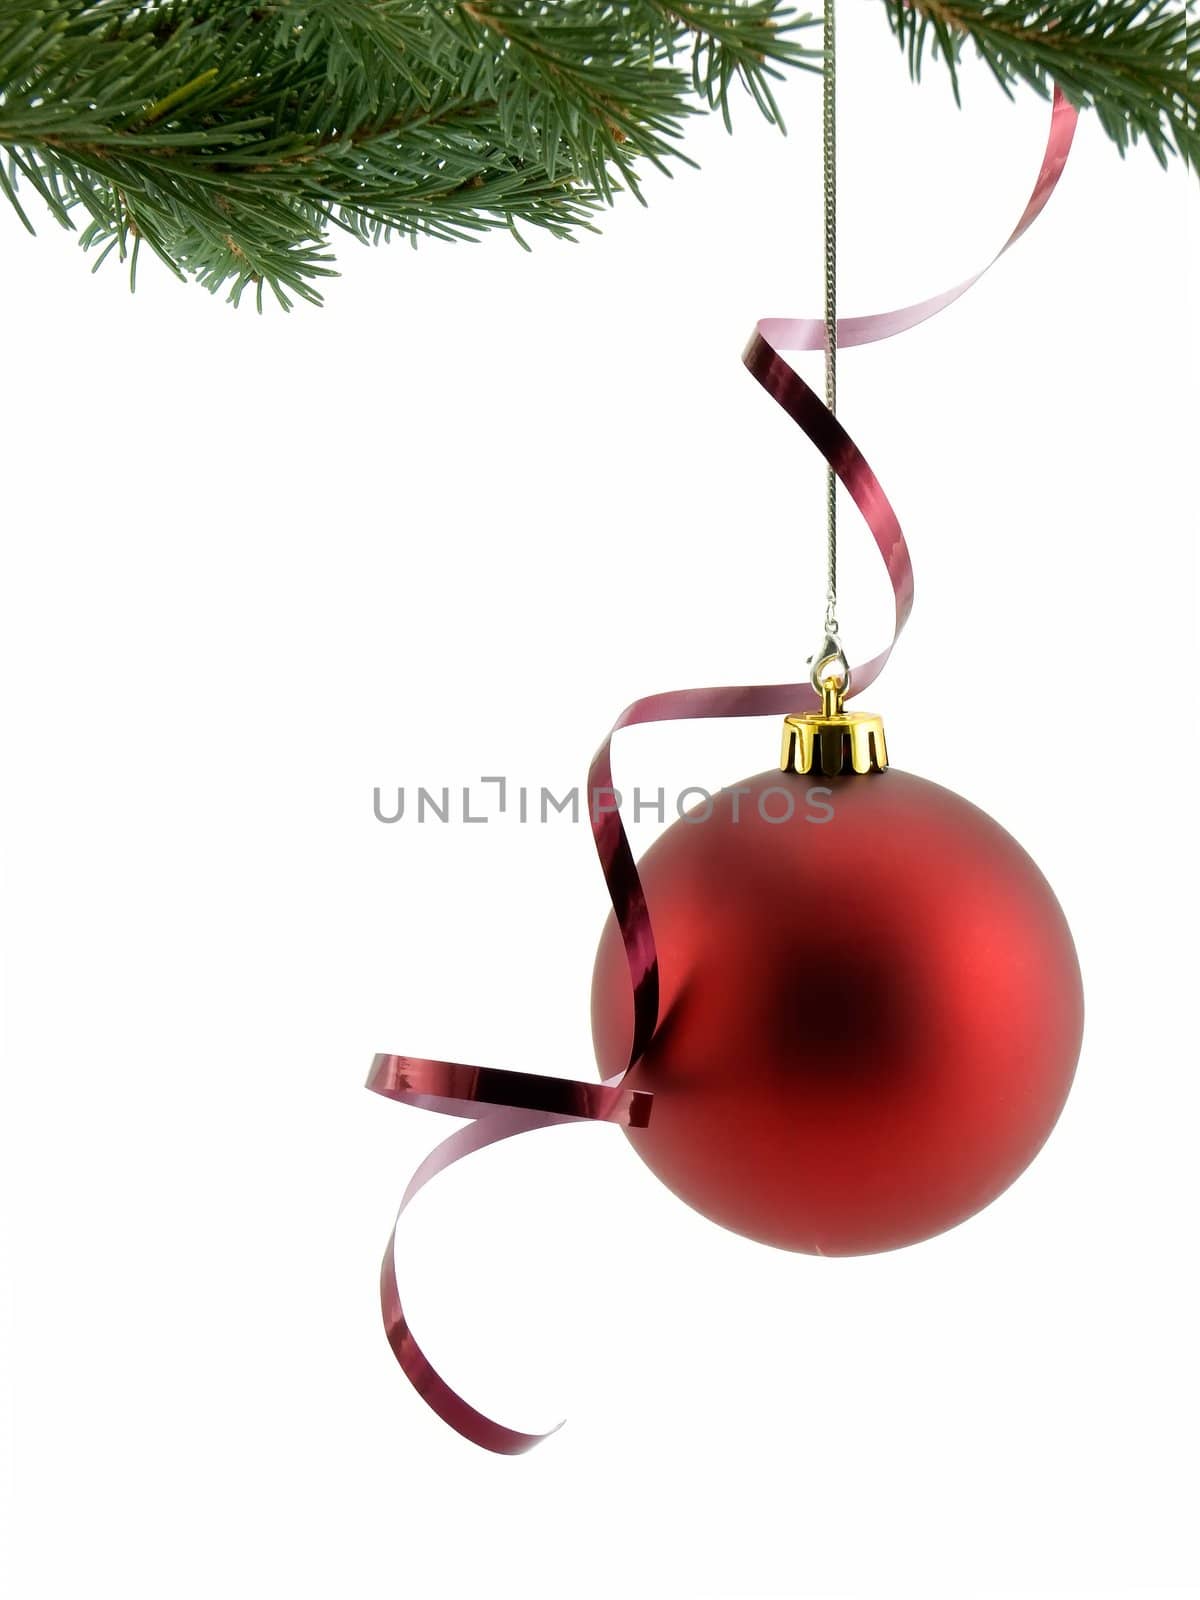 Red christmas ornament with ribbon, hanging from a tree, isolated on white